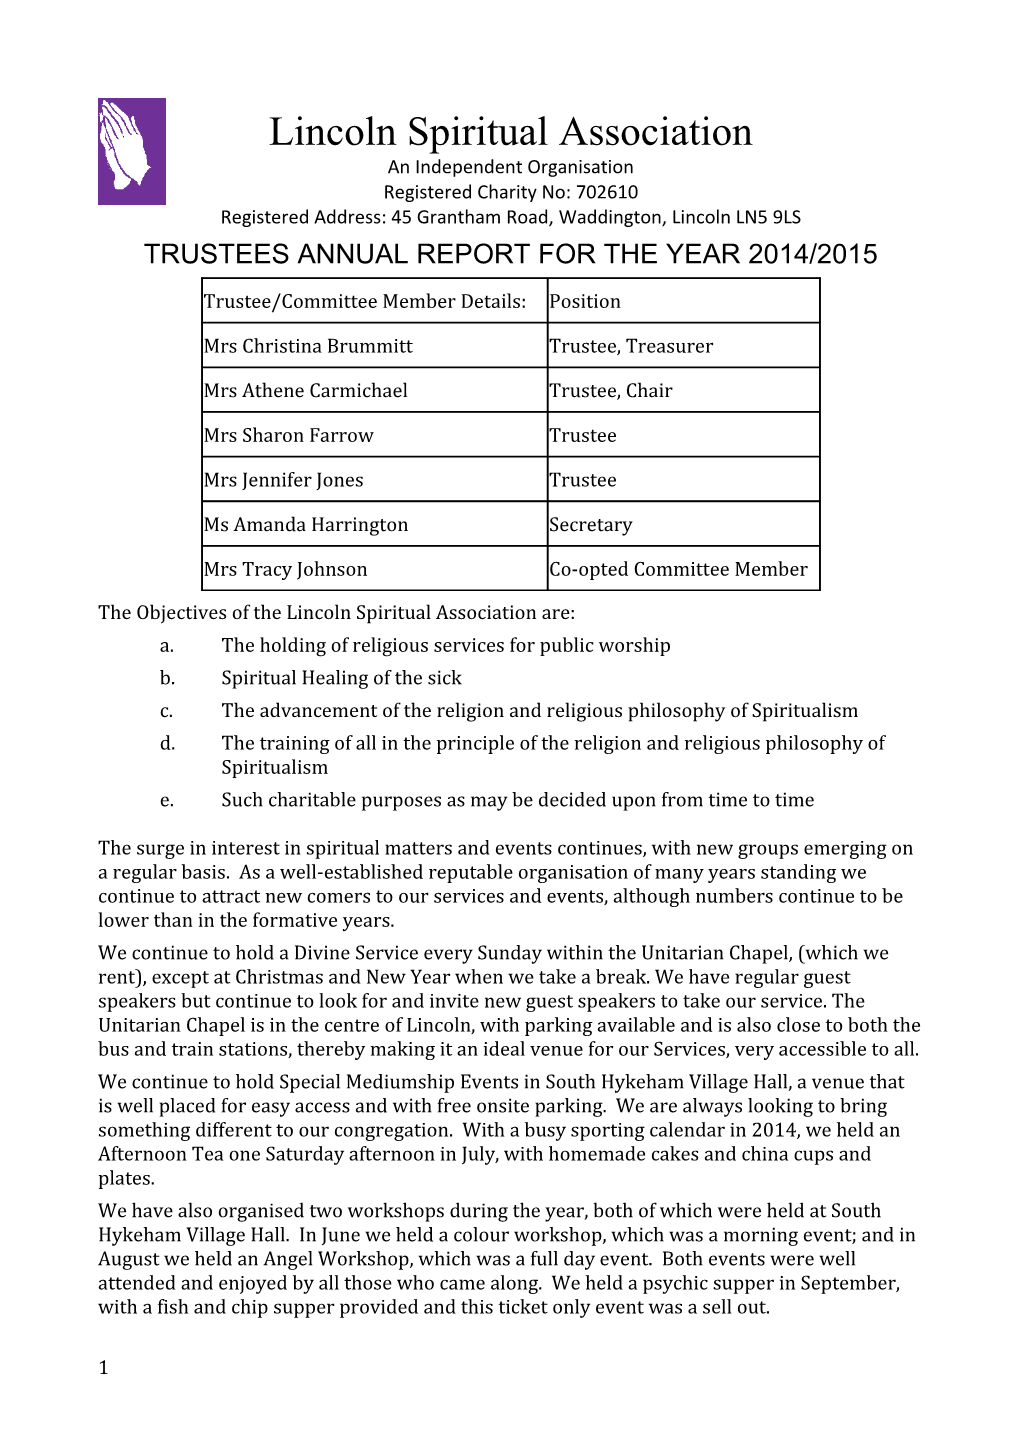 Trustees Annual Report for the Year 2014/2015